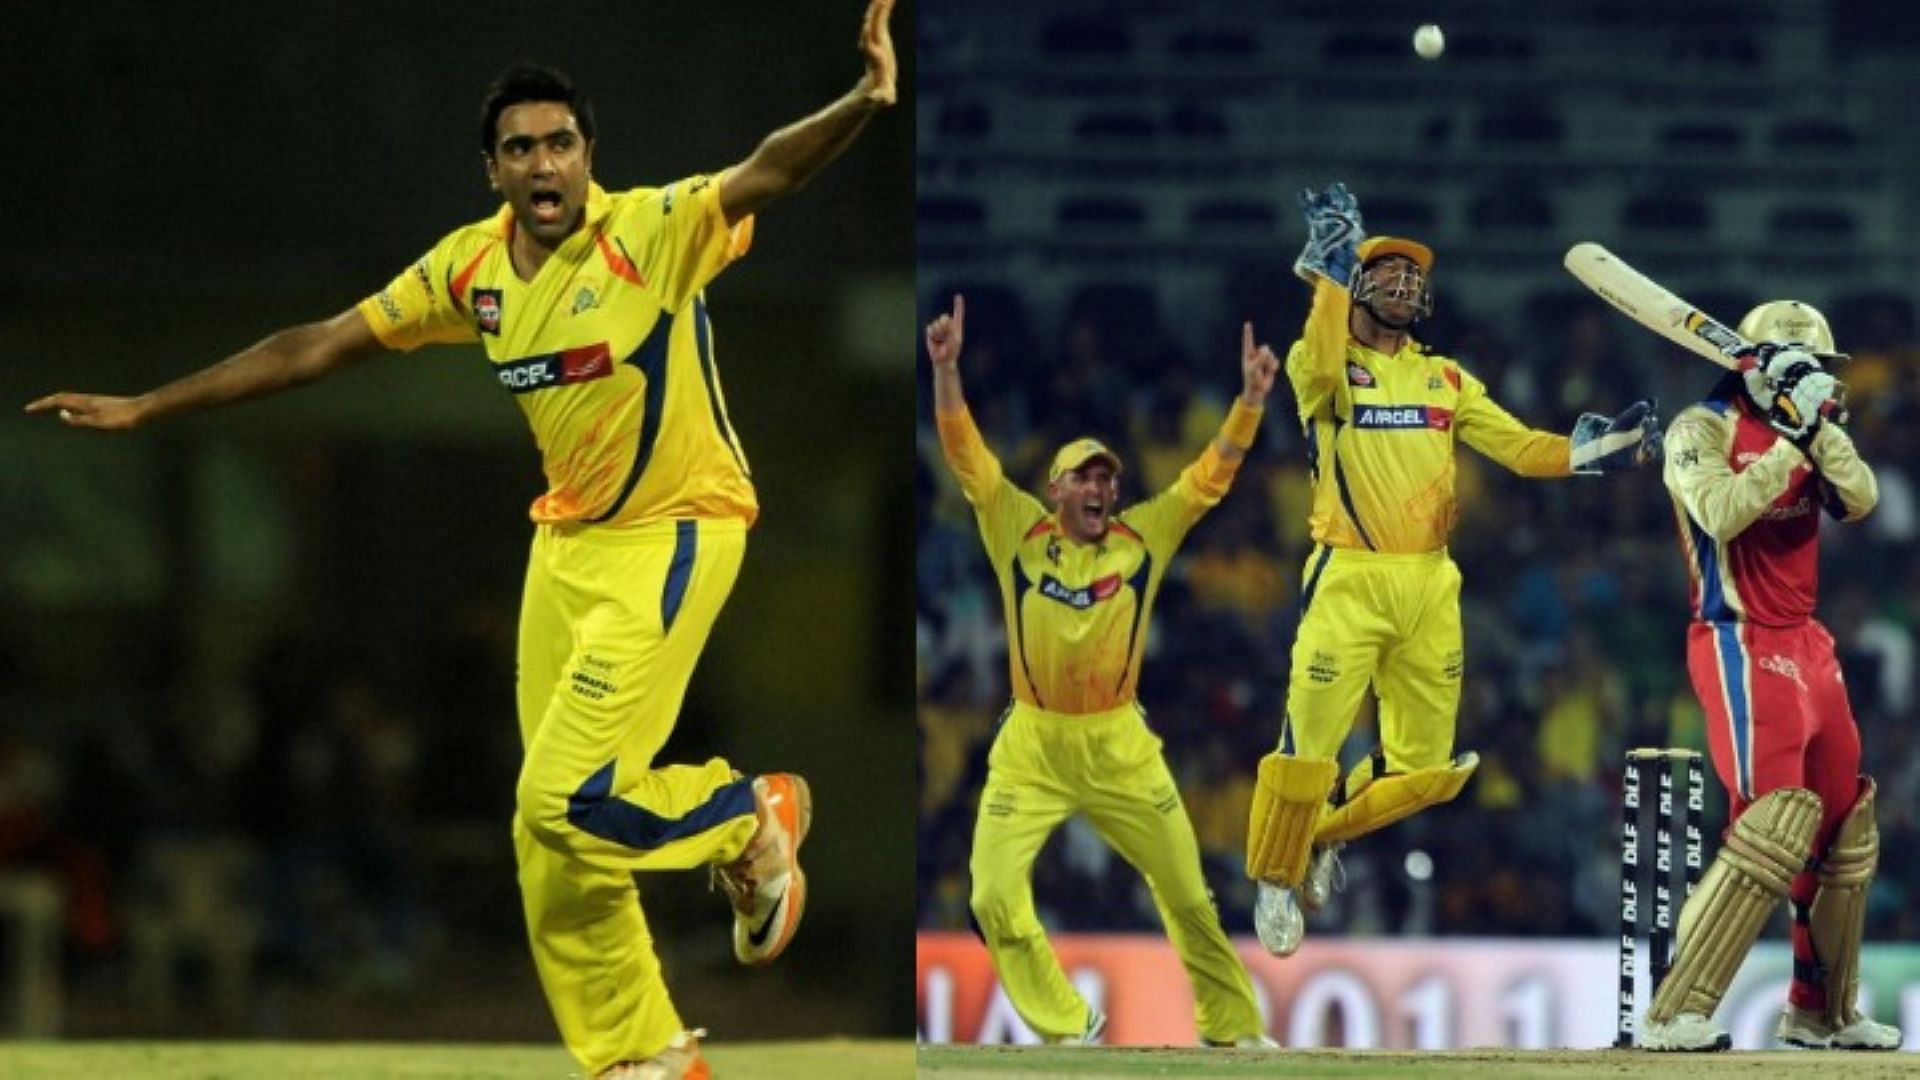 Ravi Ashwin&#039;s spell in the 2011 final led to CSK&#039;s crushing win against RCB